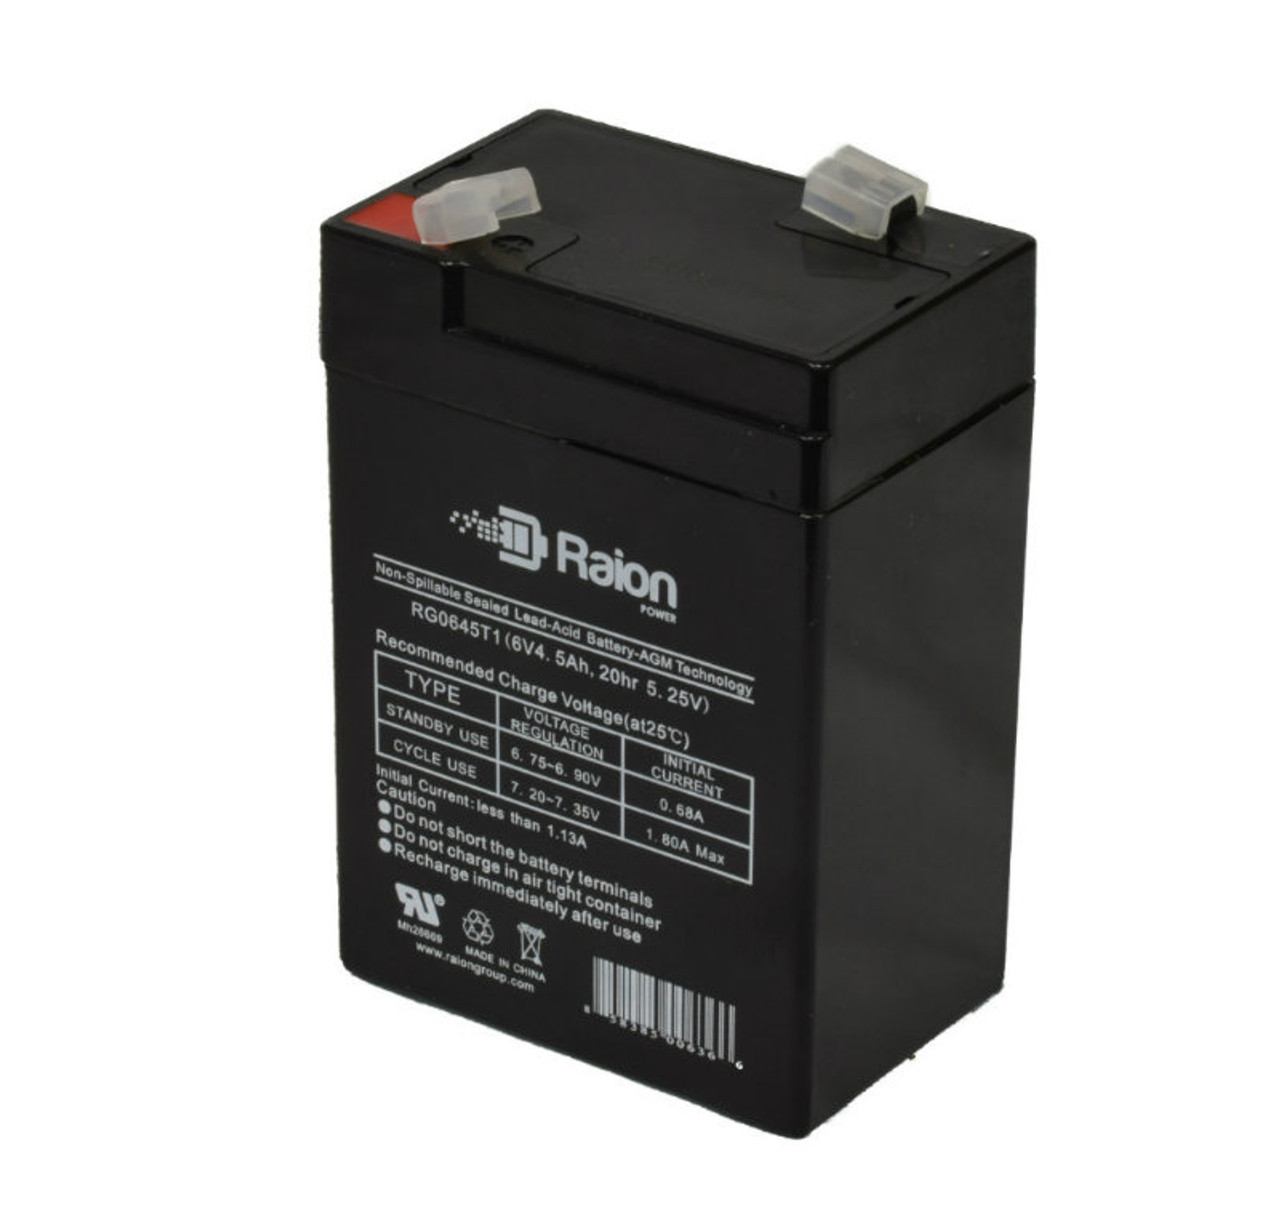 Raion Power RG0645T1 6V 4.5Ah Replacement Battery Cartridge for Trio TL9300863